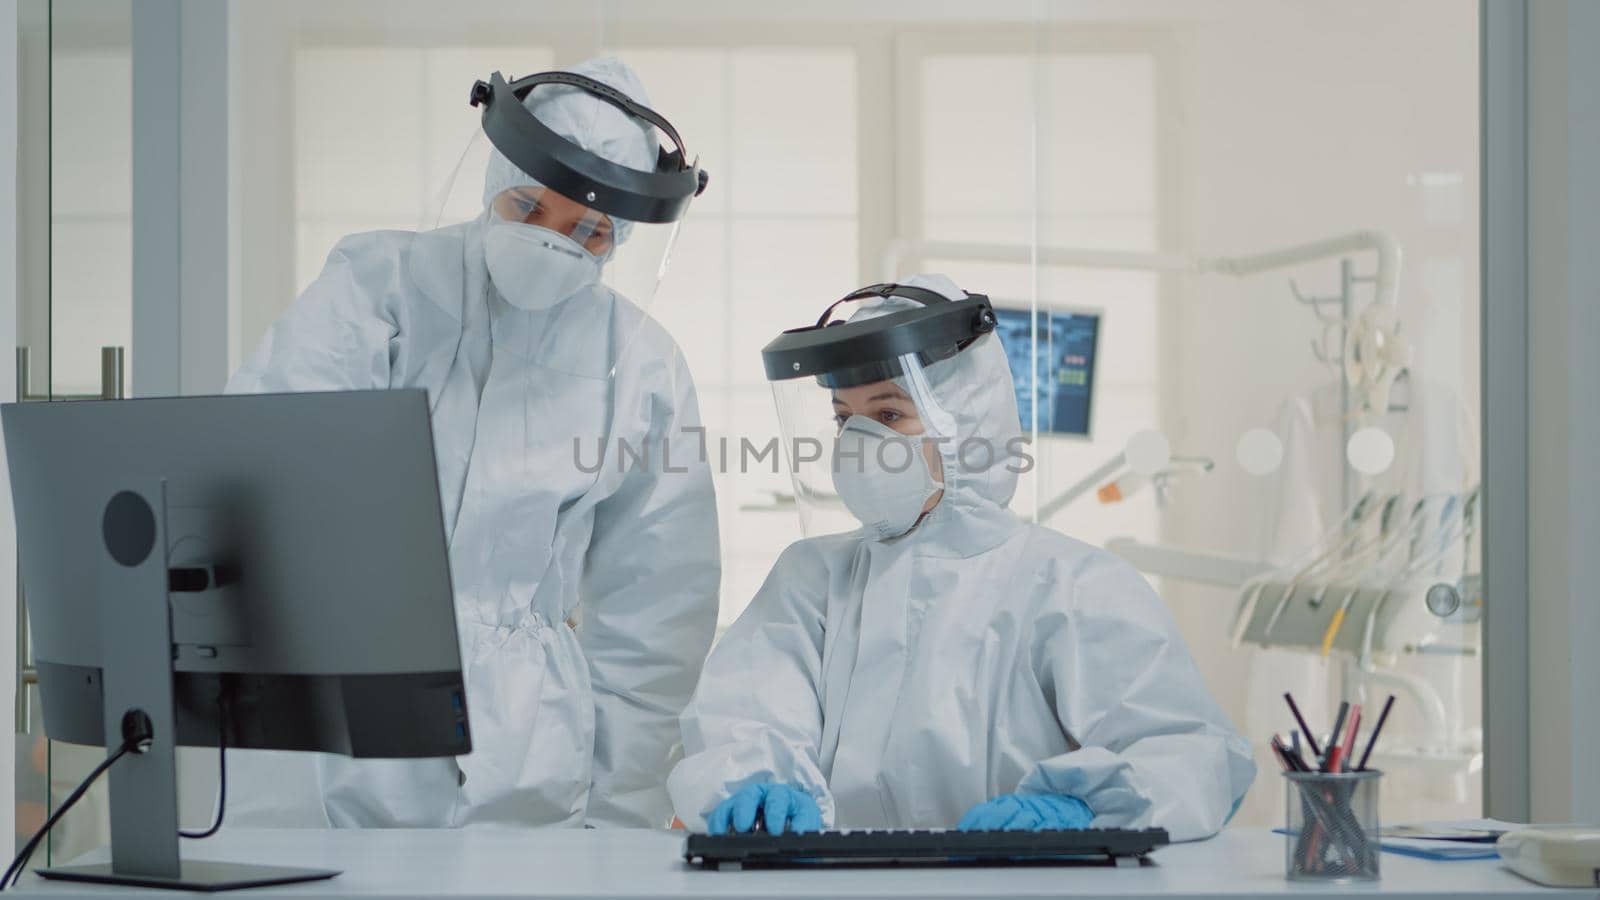 Dentistry team of specialists with ppe suits using computer for modern dental healthcare. Nurse sitting at desk, looking at monitor while dentist analyzing screen during covid pandemic